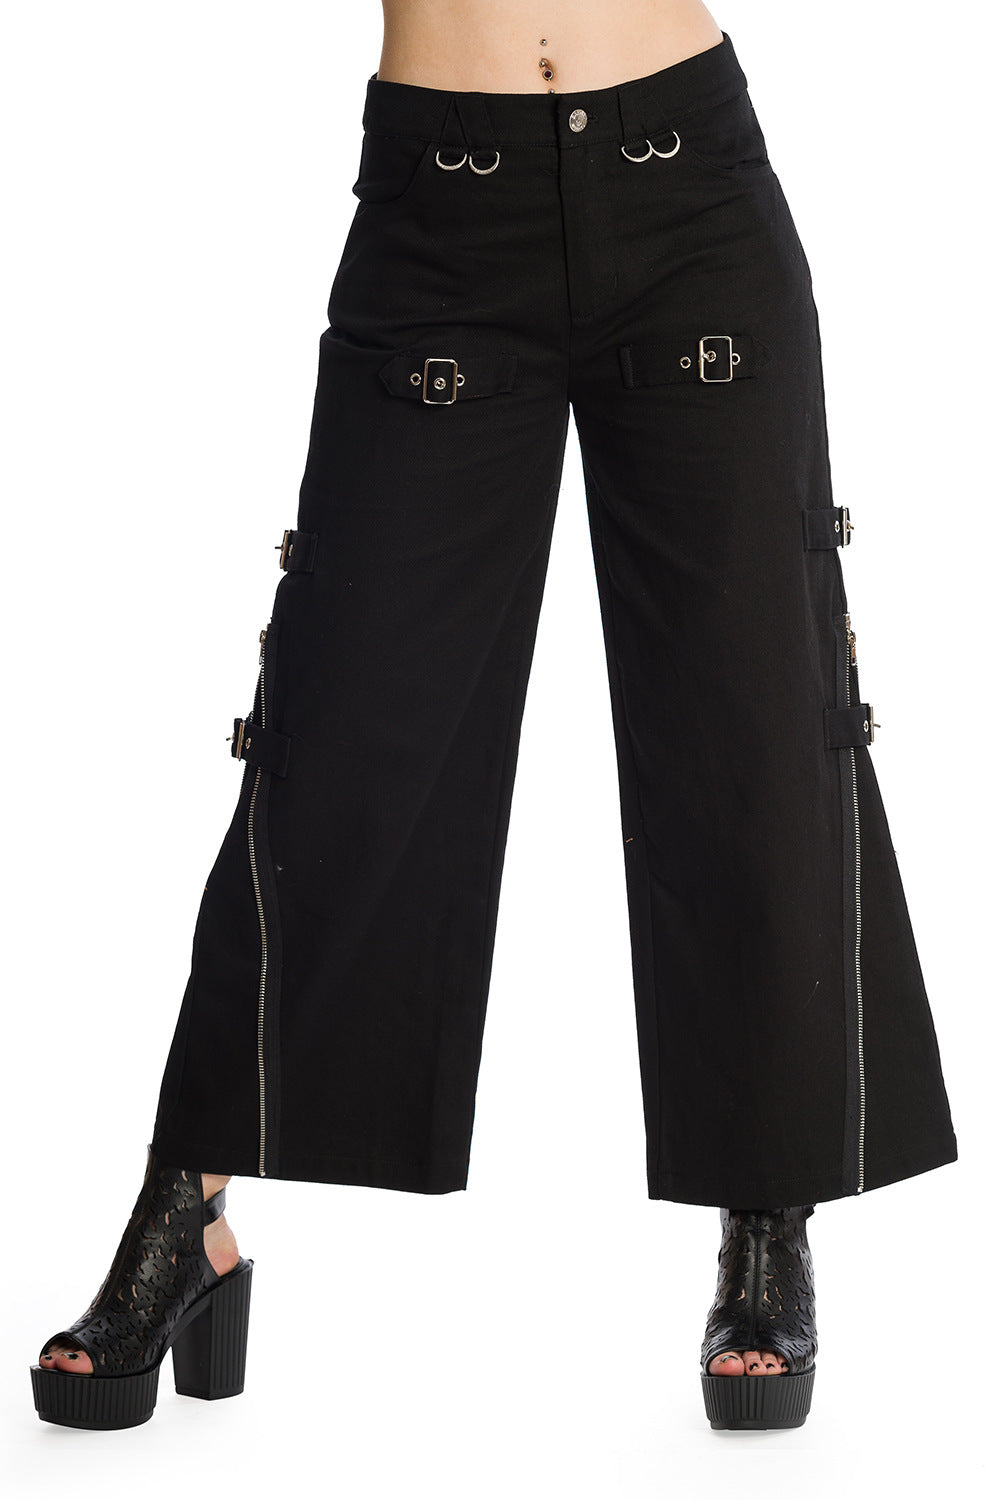 Tanith Trousers